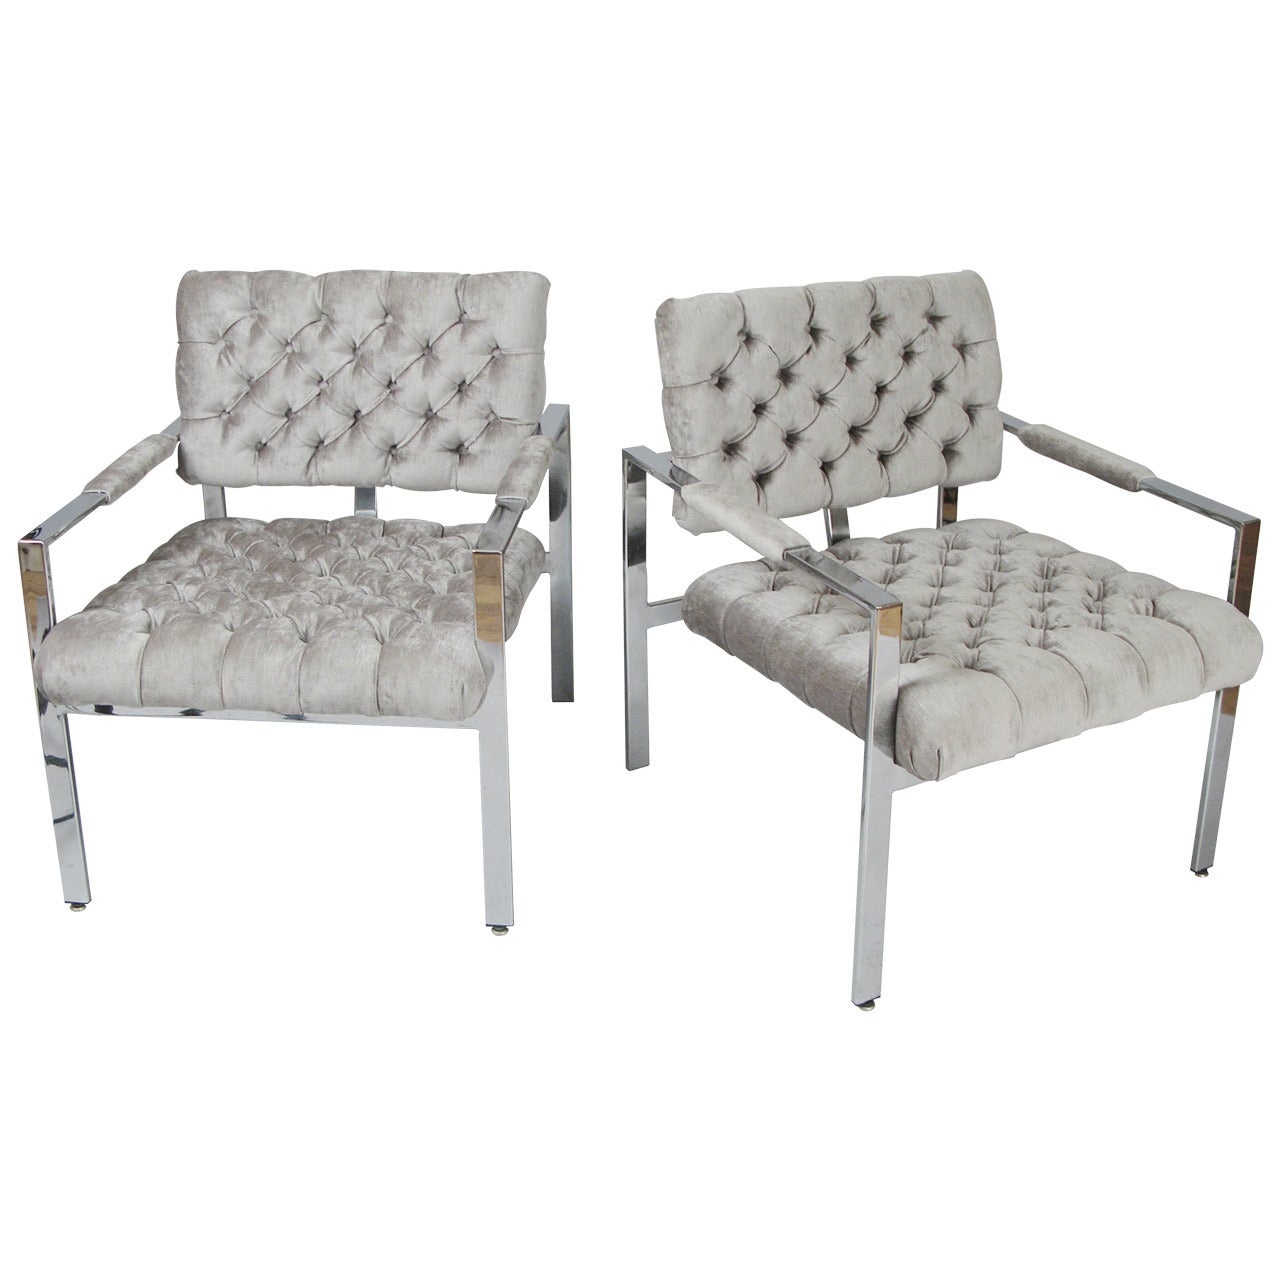 Pair of Vintage Chrome and Tufted Velvet Lounge Chairs by Milo Baughman